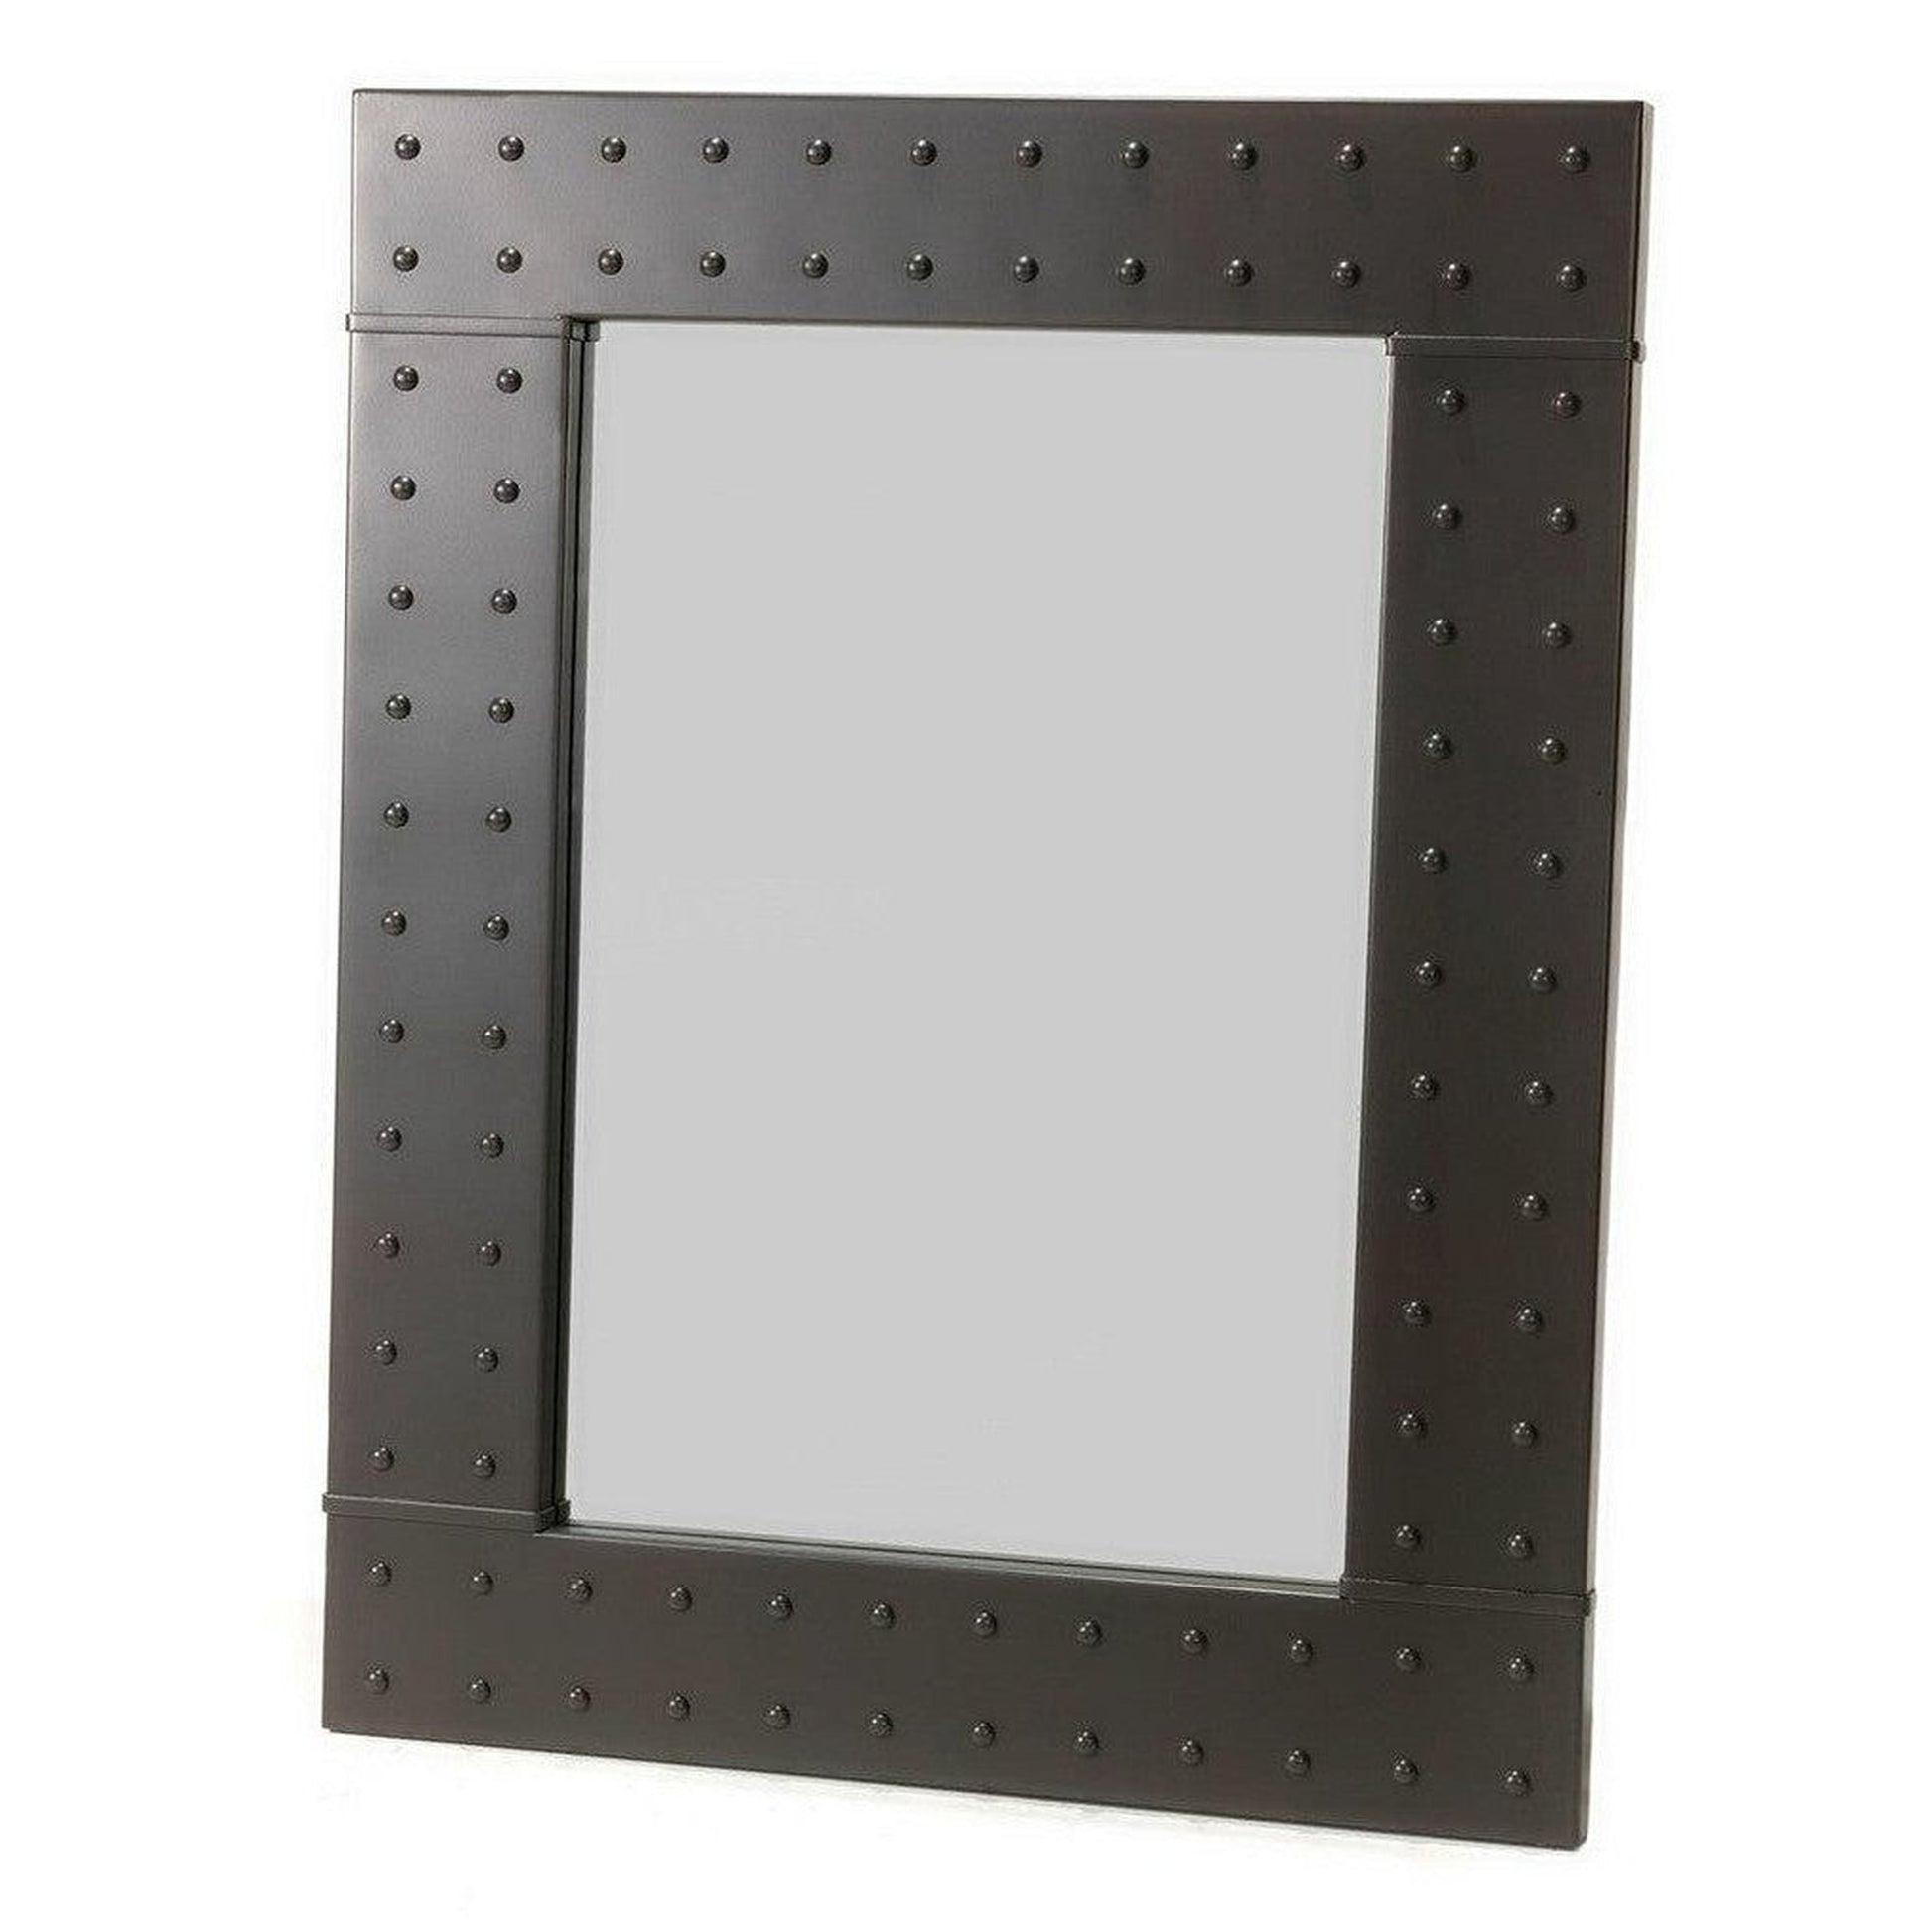 Stone County Ironworks Merrimack Rivet 36" x 45" Large Hand Rubbed Bronze Iron Wall Mirror With Copper Iron Accent